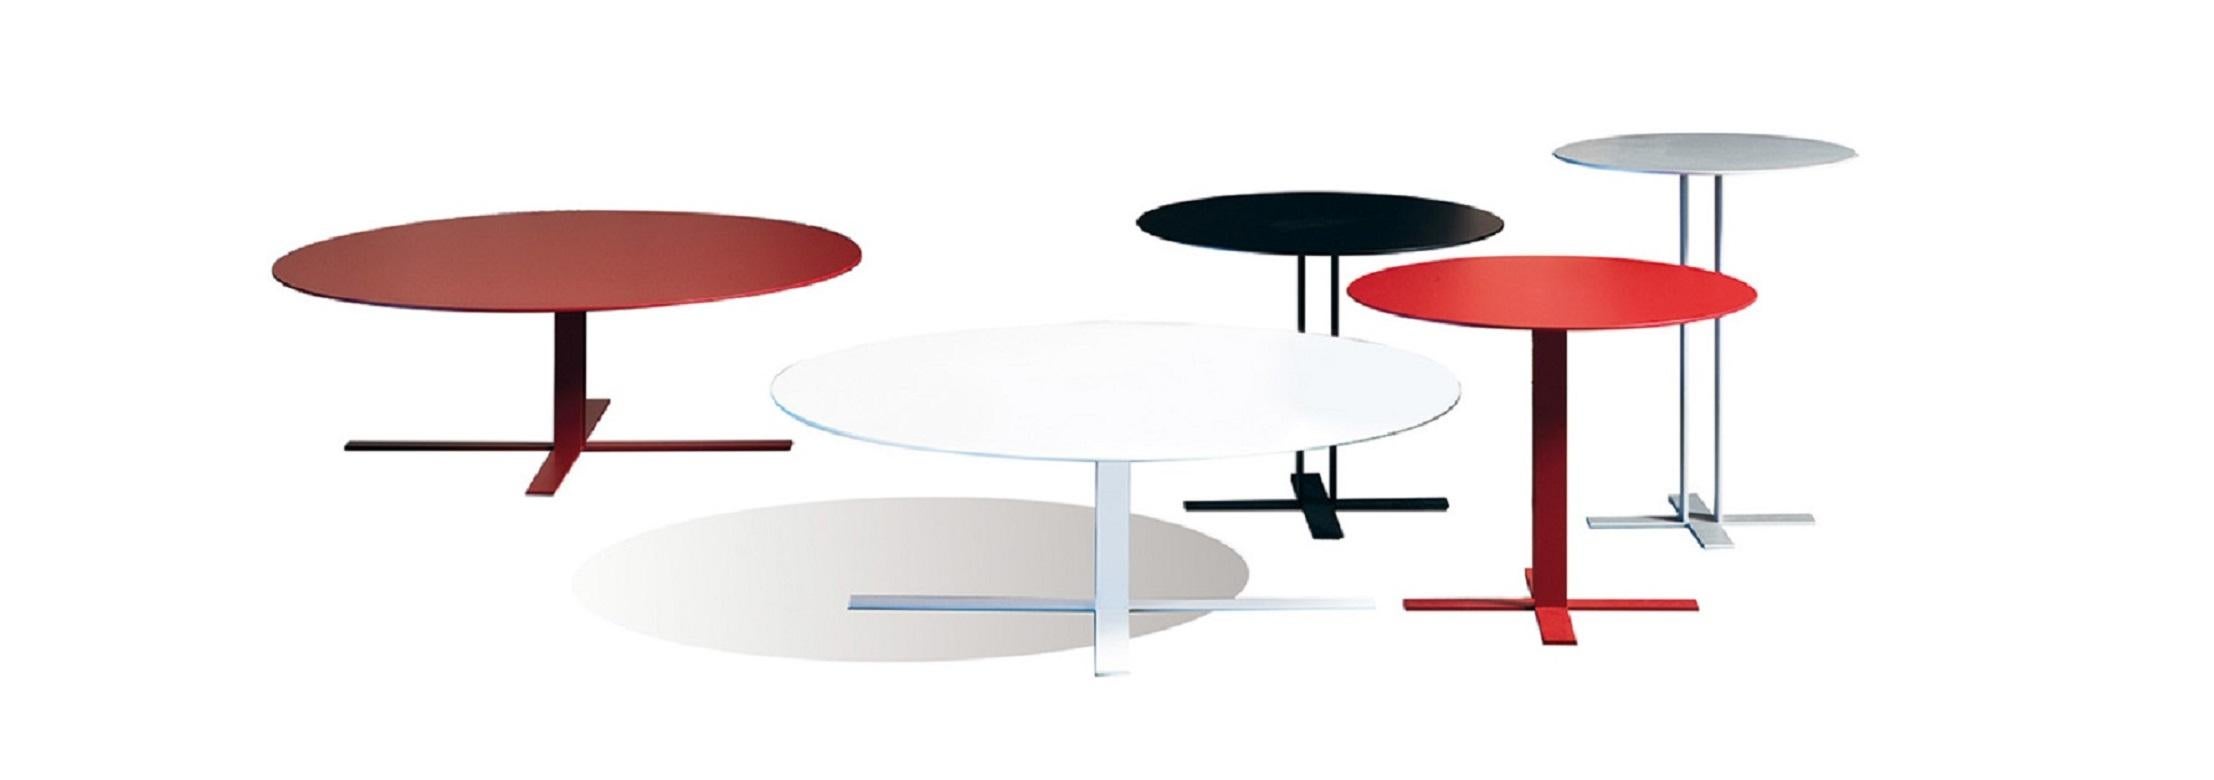 A light, crisp and stylish table with a strong, clean design and an elegant, dainty spirit. Metal base and MDF top. Available in a matt lacquered finish.

The designer Giuseppe Viganò is dedicated to the industrial design of furniture products and